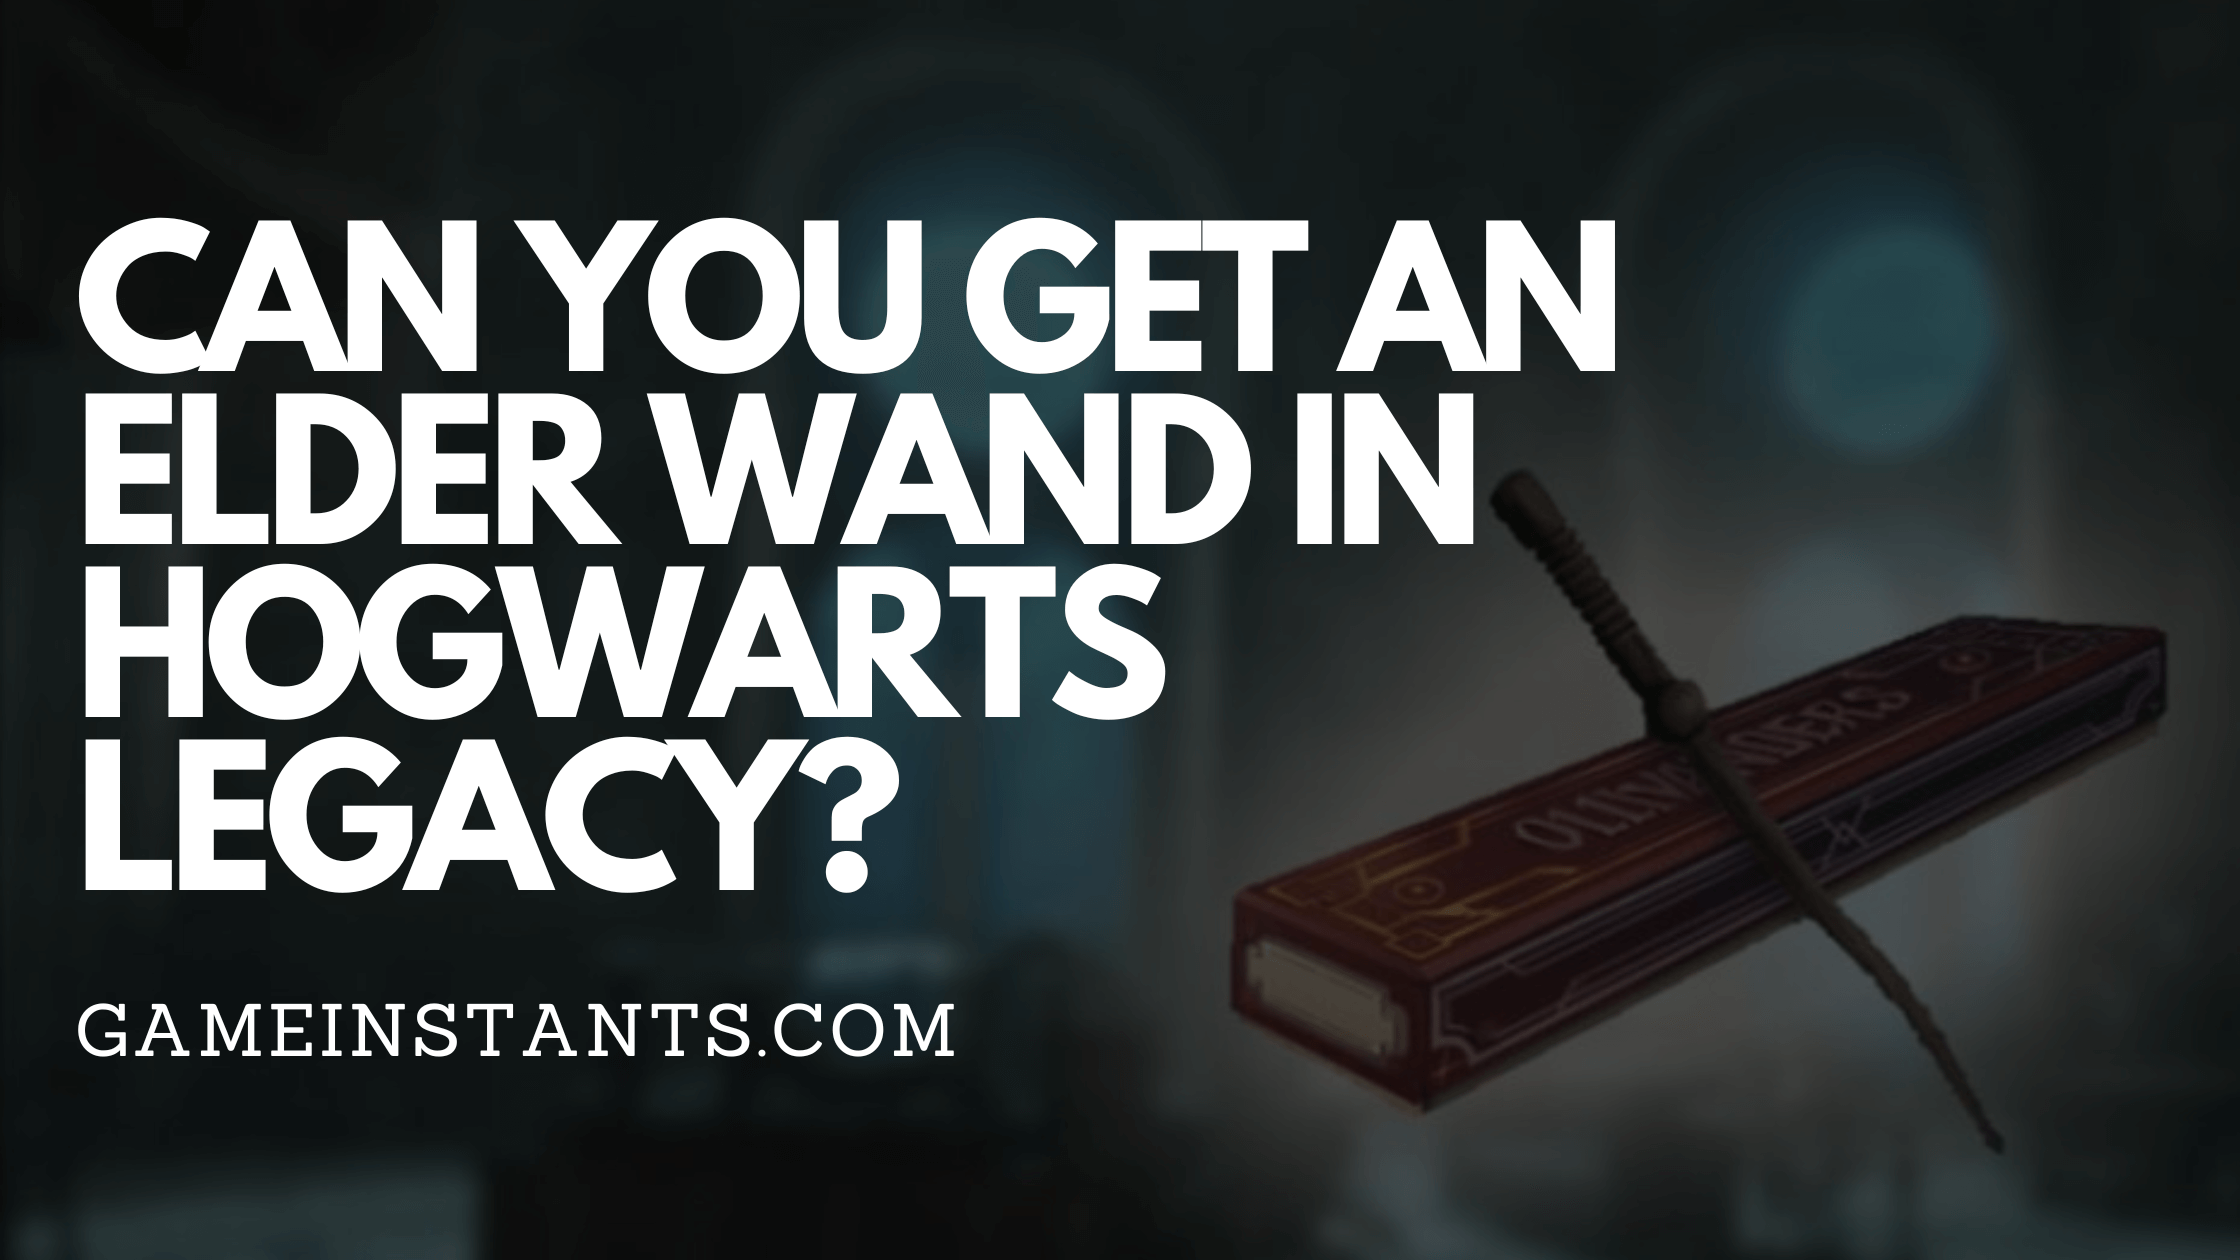 Can You Get an Elder Wand in Hogwarts Legacy